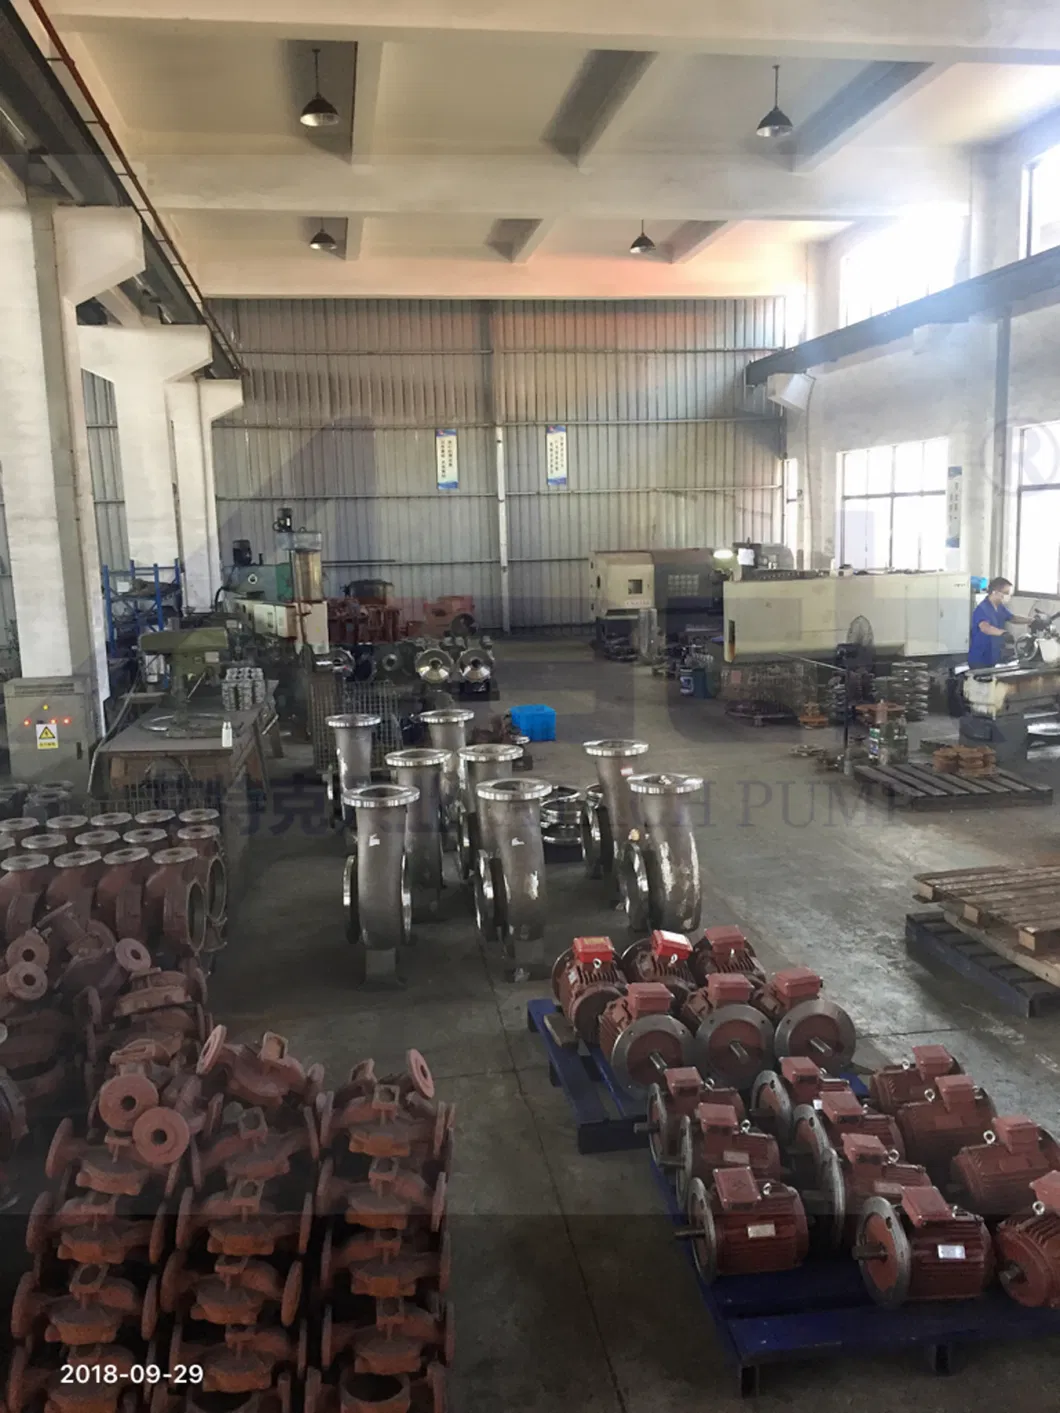 Horizontal Single Stage Anti-Corrosion Seawater Chemical Process Stainless Steel Centrifugal Pump/Sea Pump/Sewage Pump/Corrosion Resistant Pump Ih80-50-200